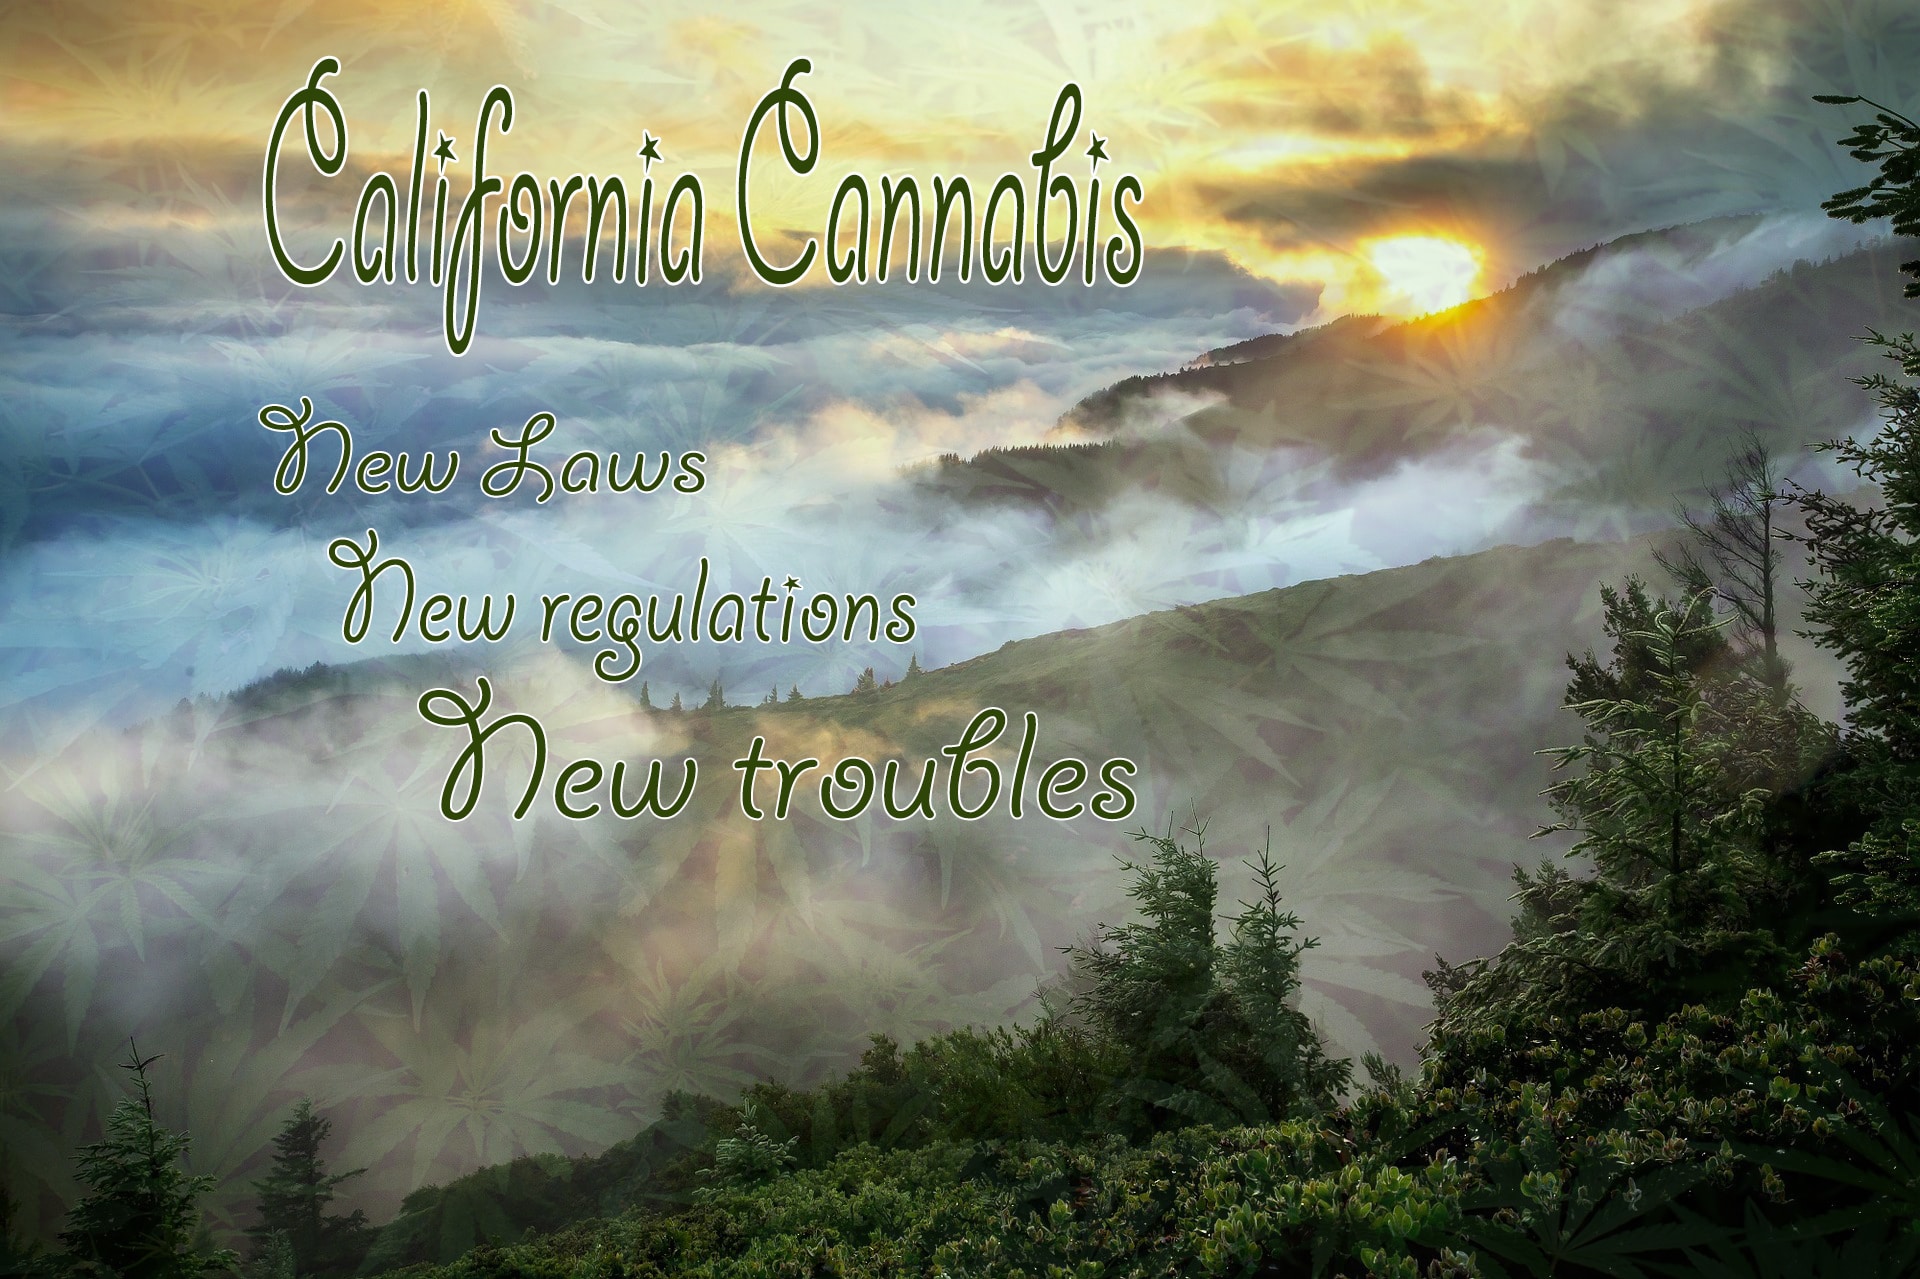 california cannabis laws mean new struggles for growers